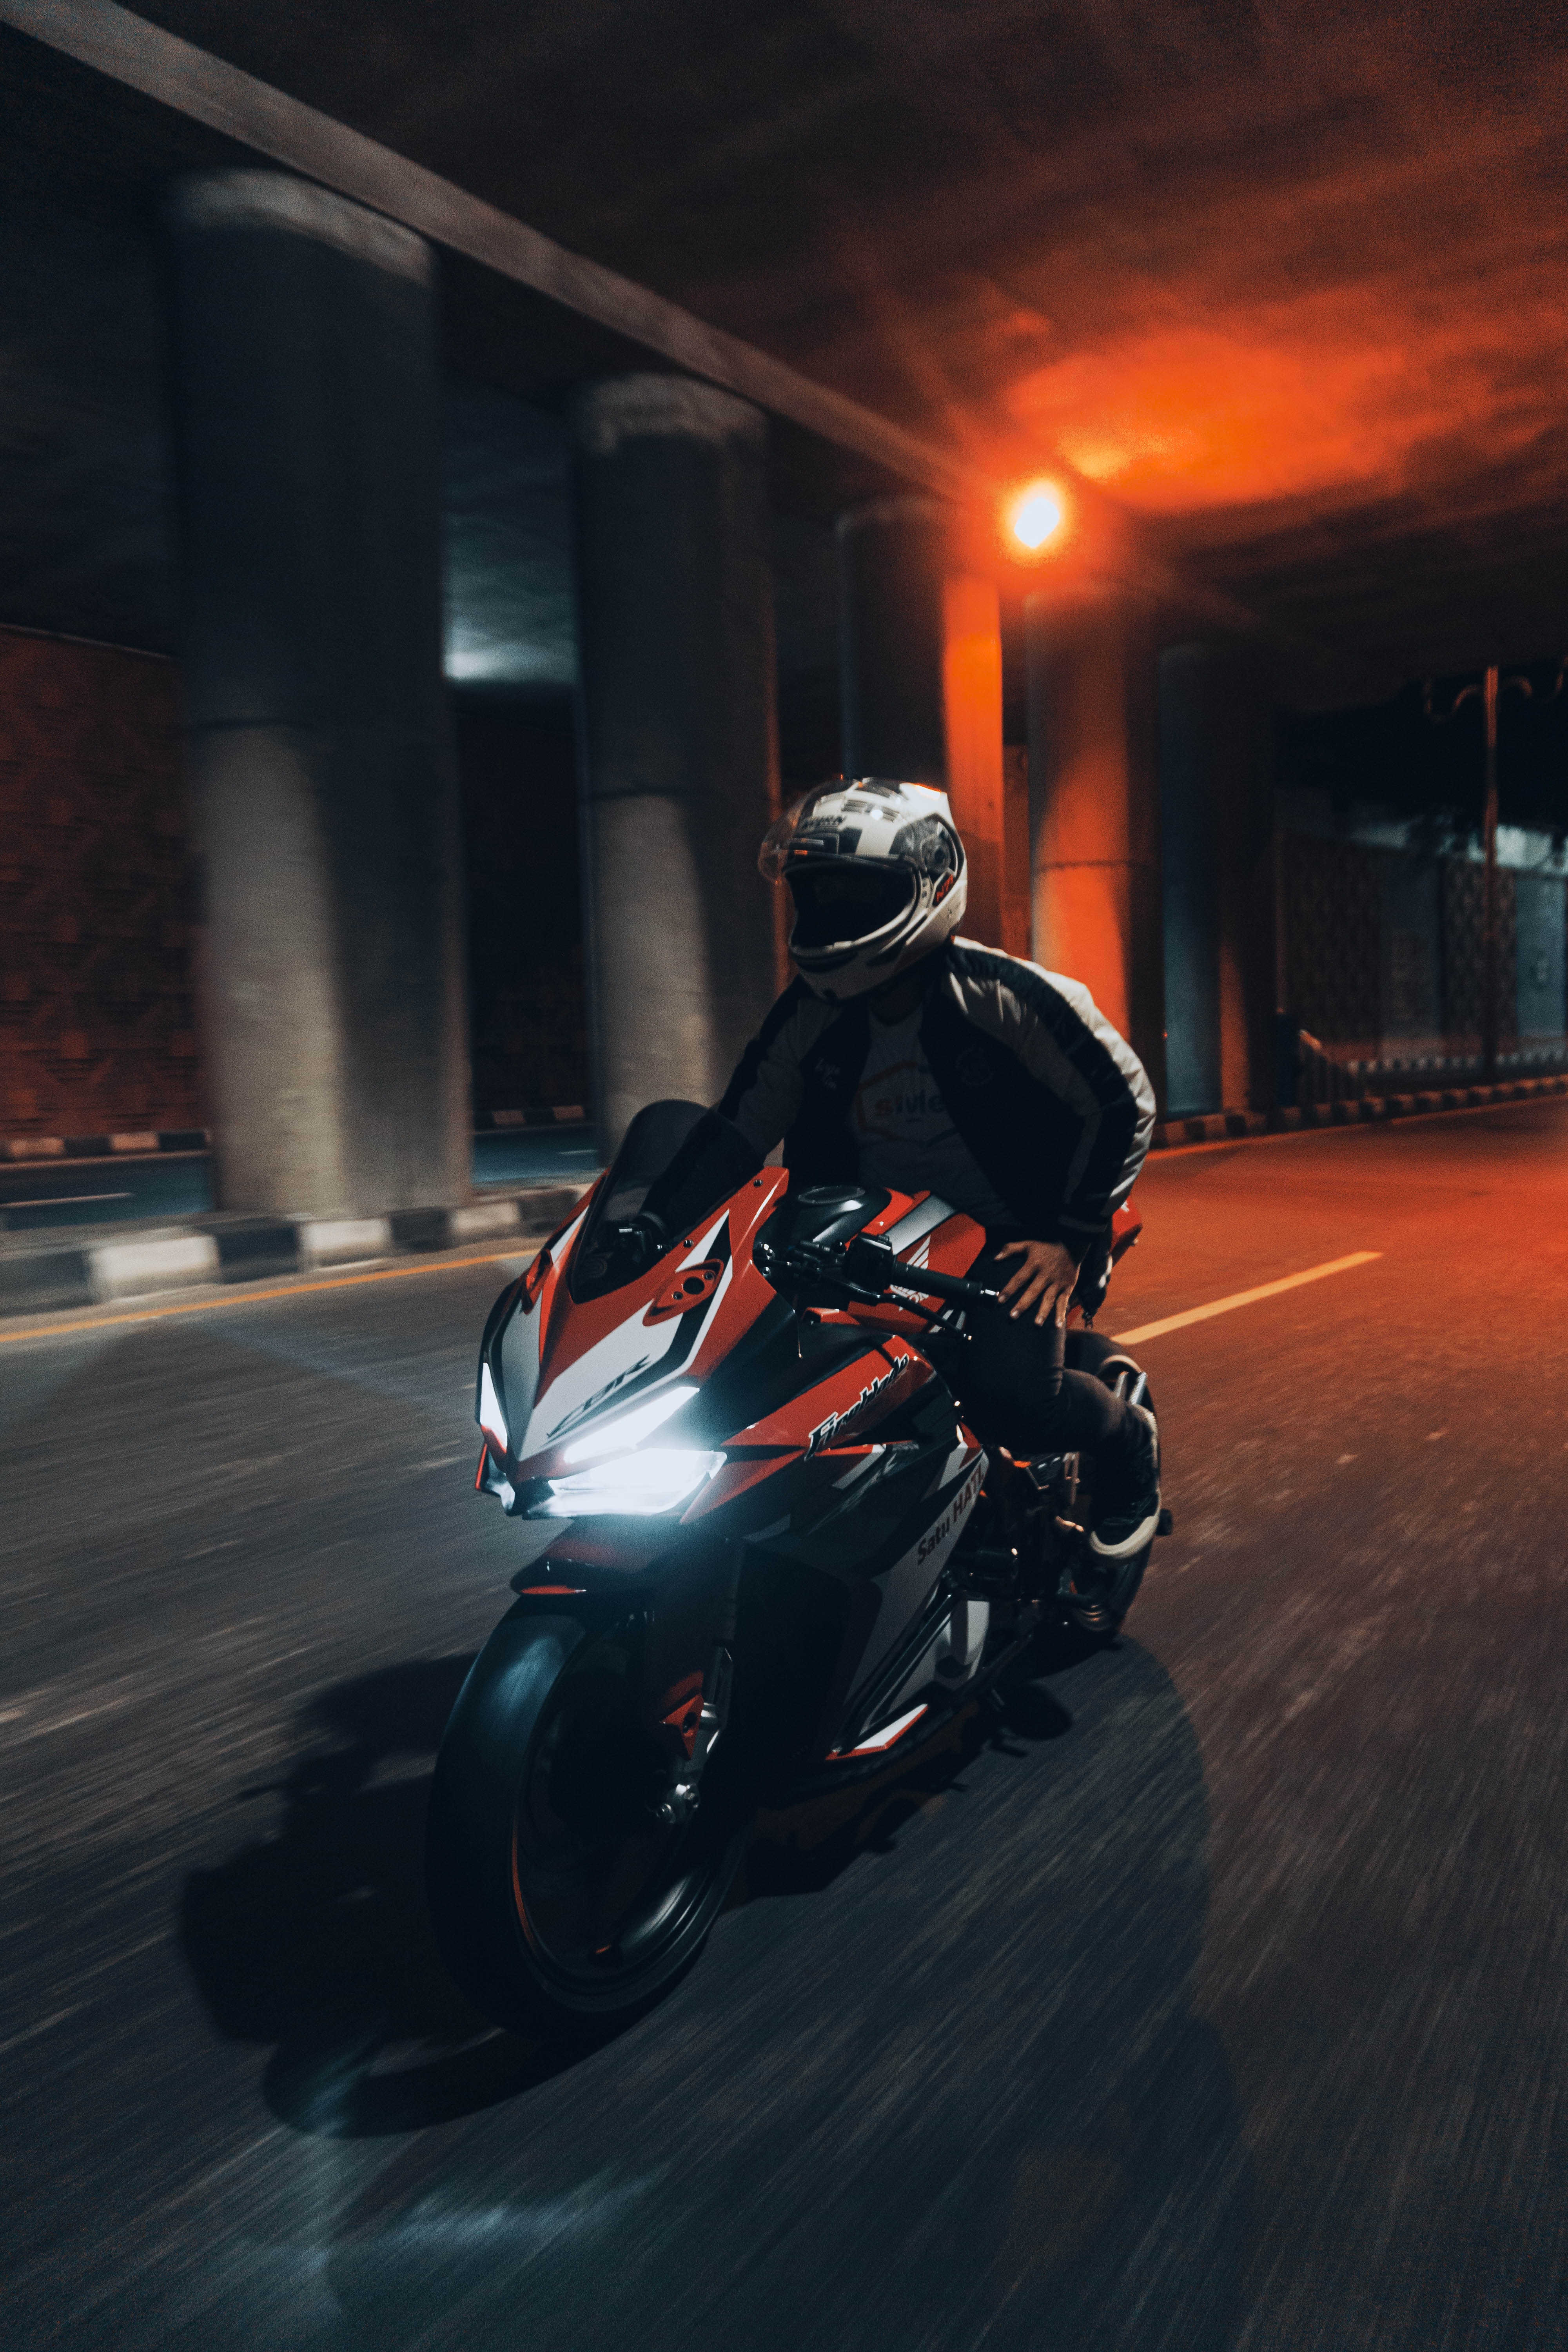 motorcycle, motorcycles, speed, motorcyclist, road, tunnel